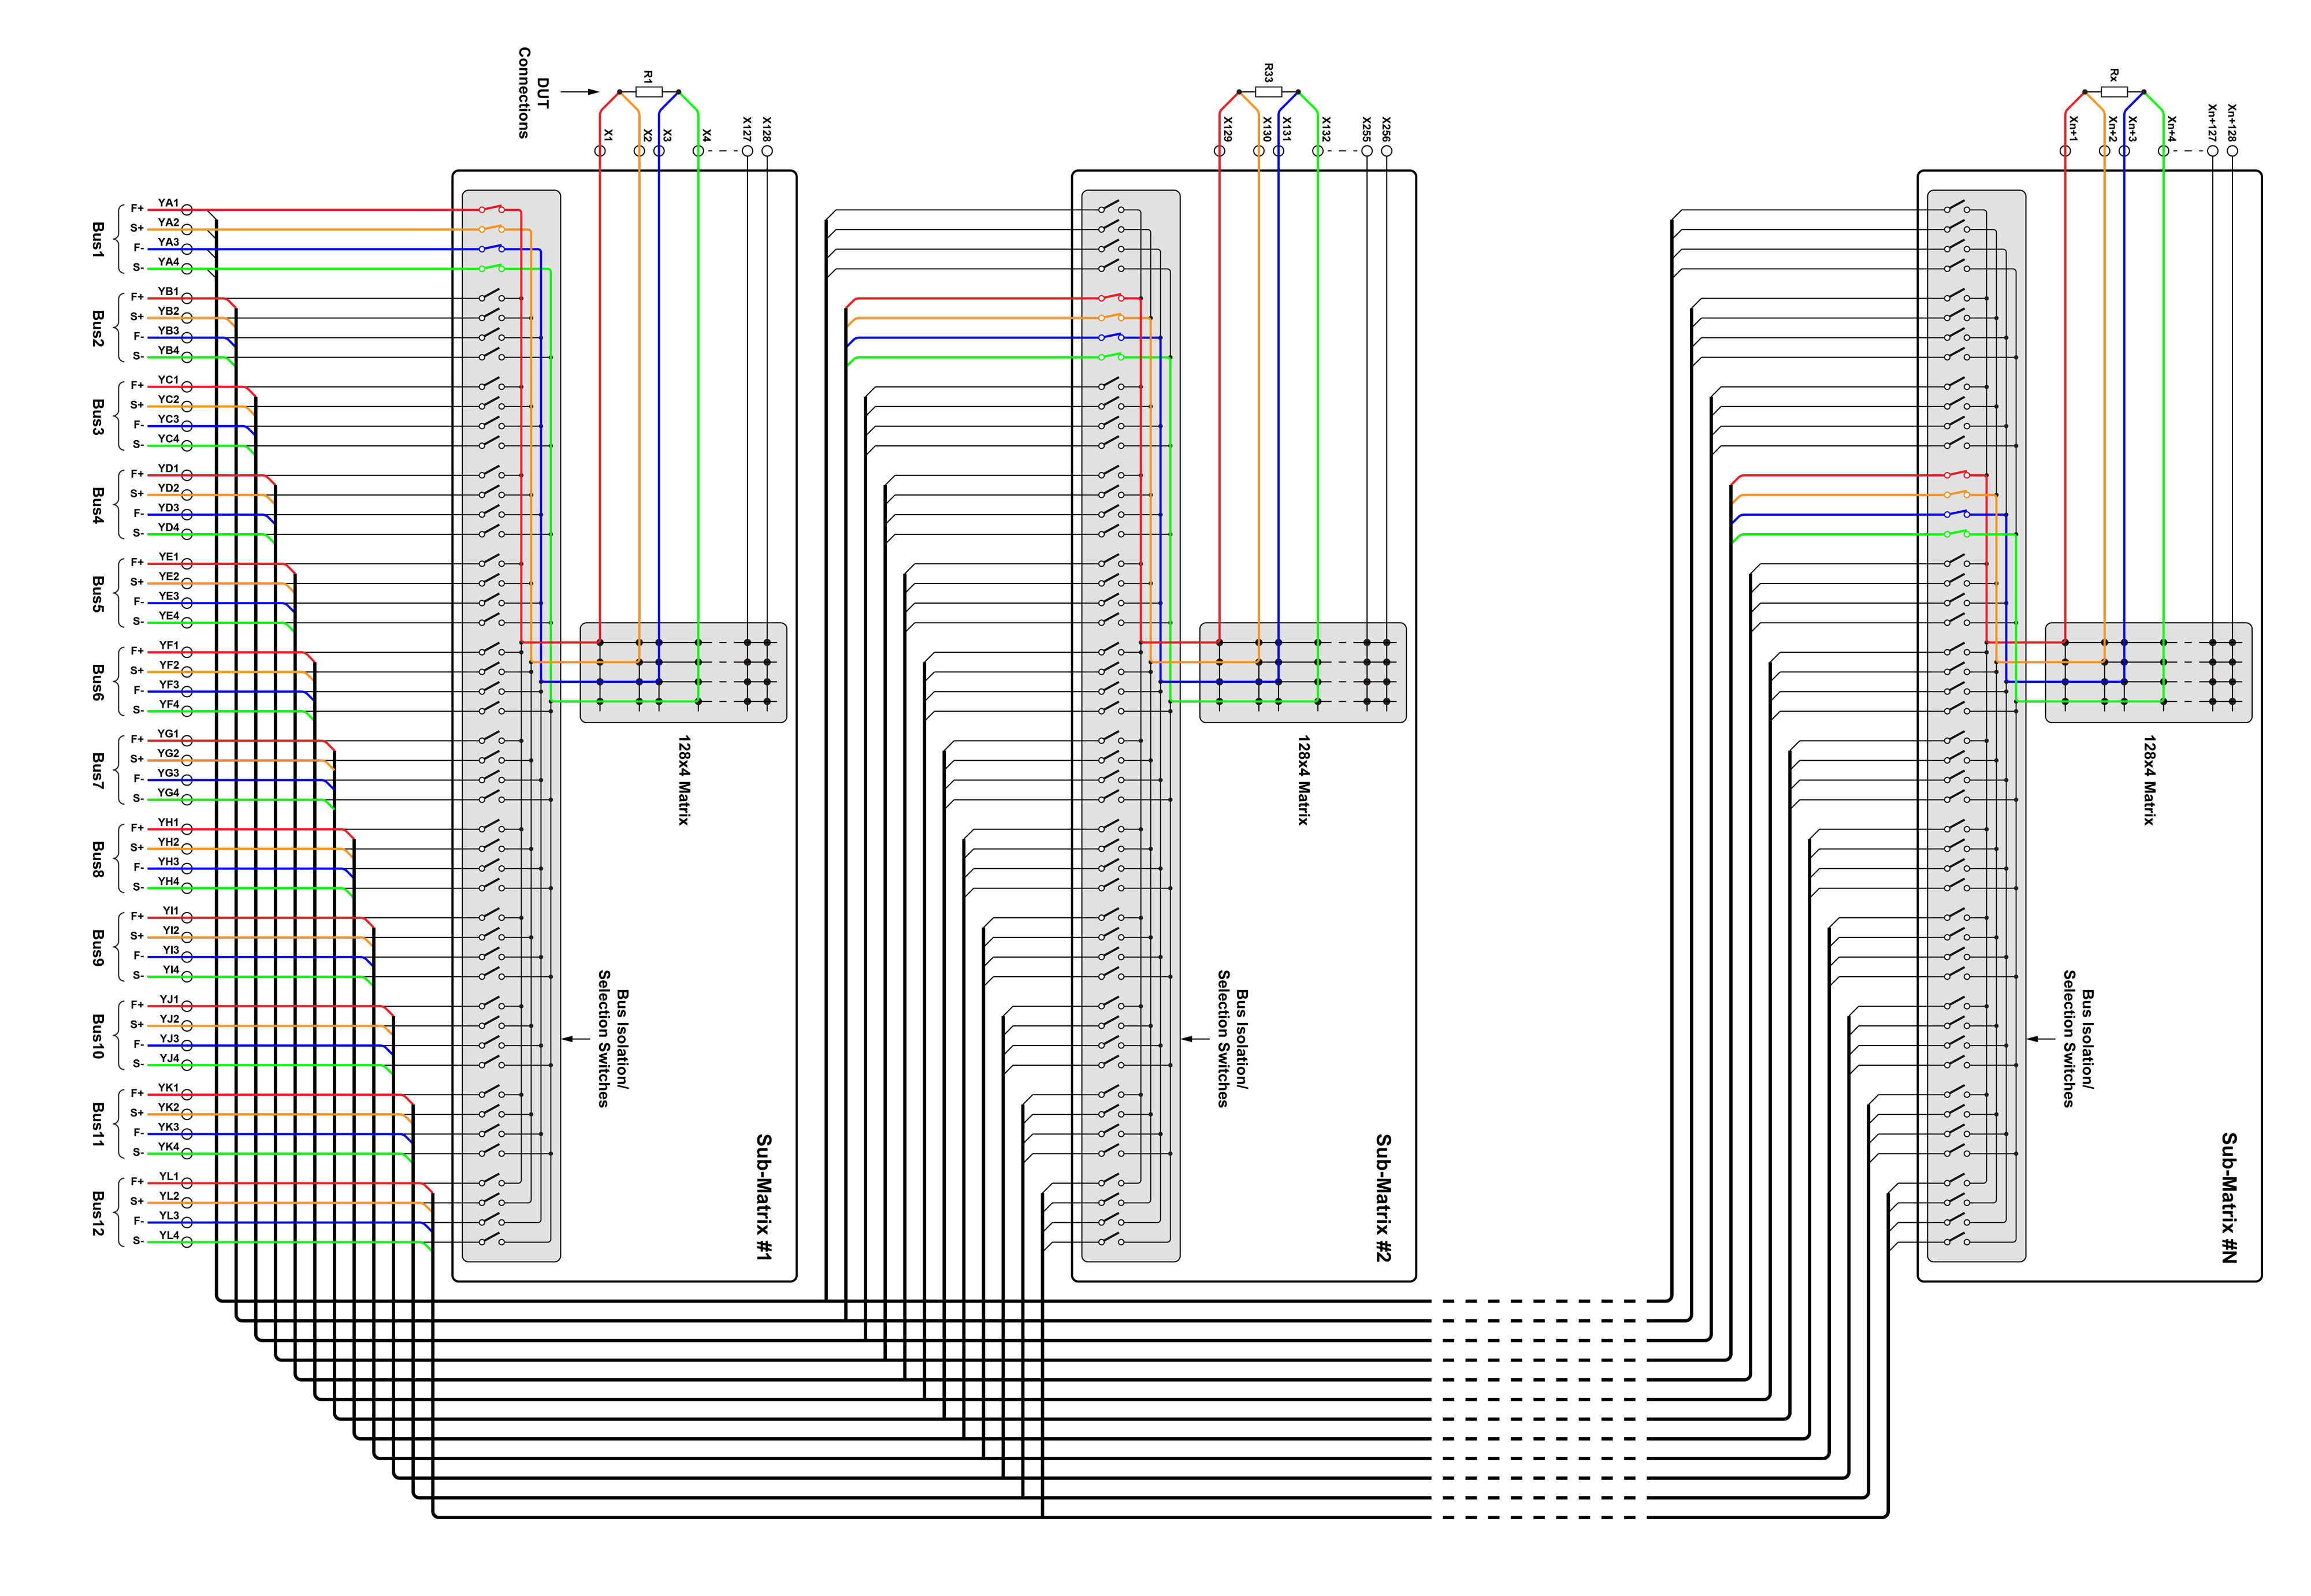 Configured as twelve individual 128x4 matrices for parallel parametric testing